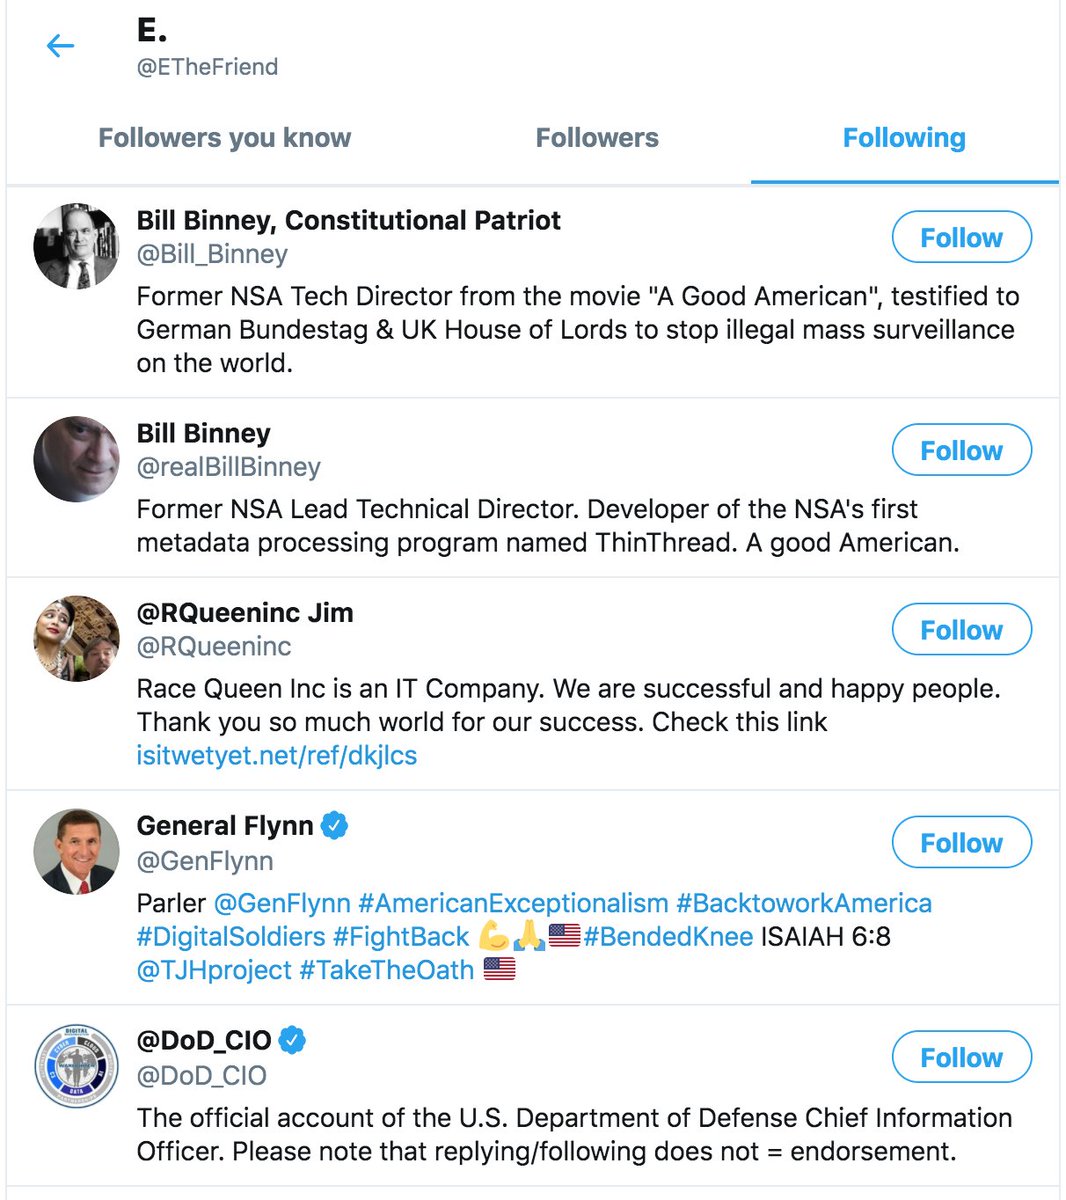 Interestingly,  @realBillBinney is not the only account followed by  @ETheFriend that supposedly belongs to Bill Binney. A second account,  @Bill_Binney, created August 27 2020, turns up as well.